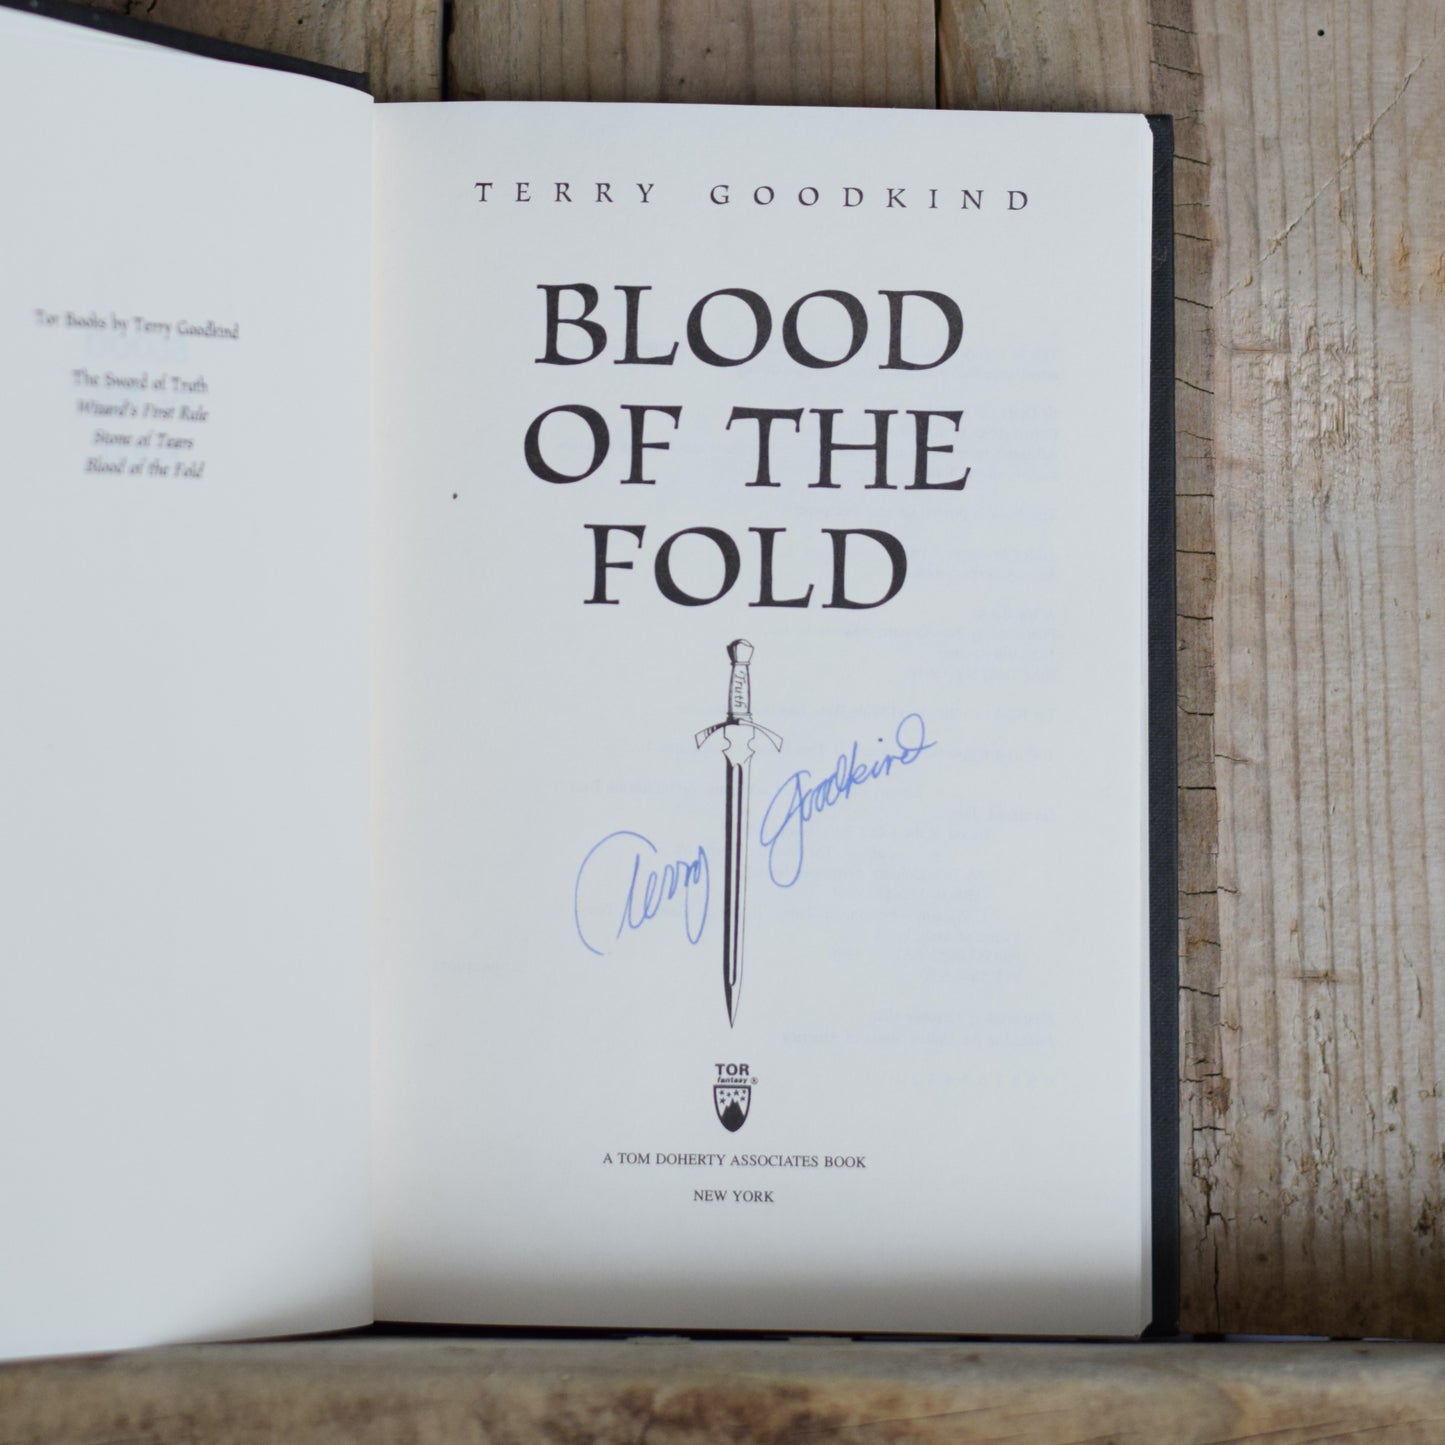 Vintage Fantasy Hardback: Terry Goodkind - Blood of the Fold SIGNED FIRST EDITION